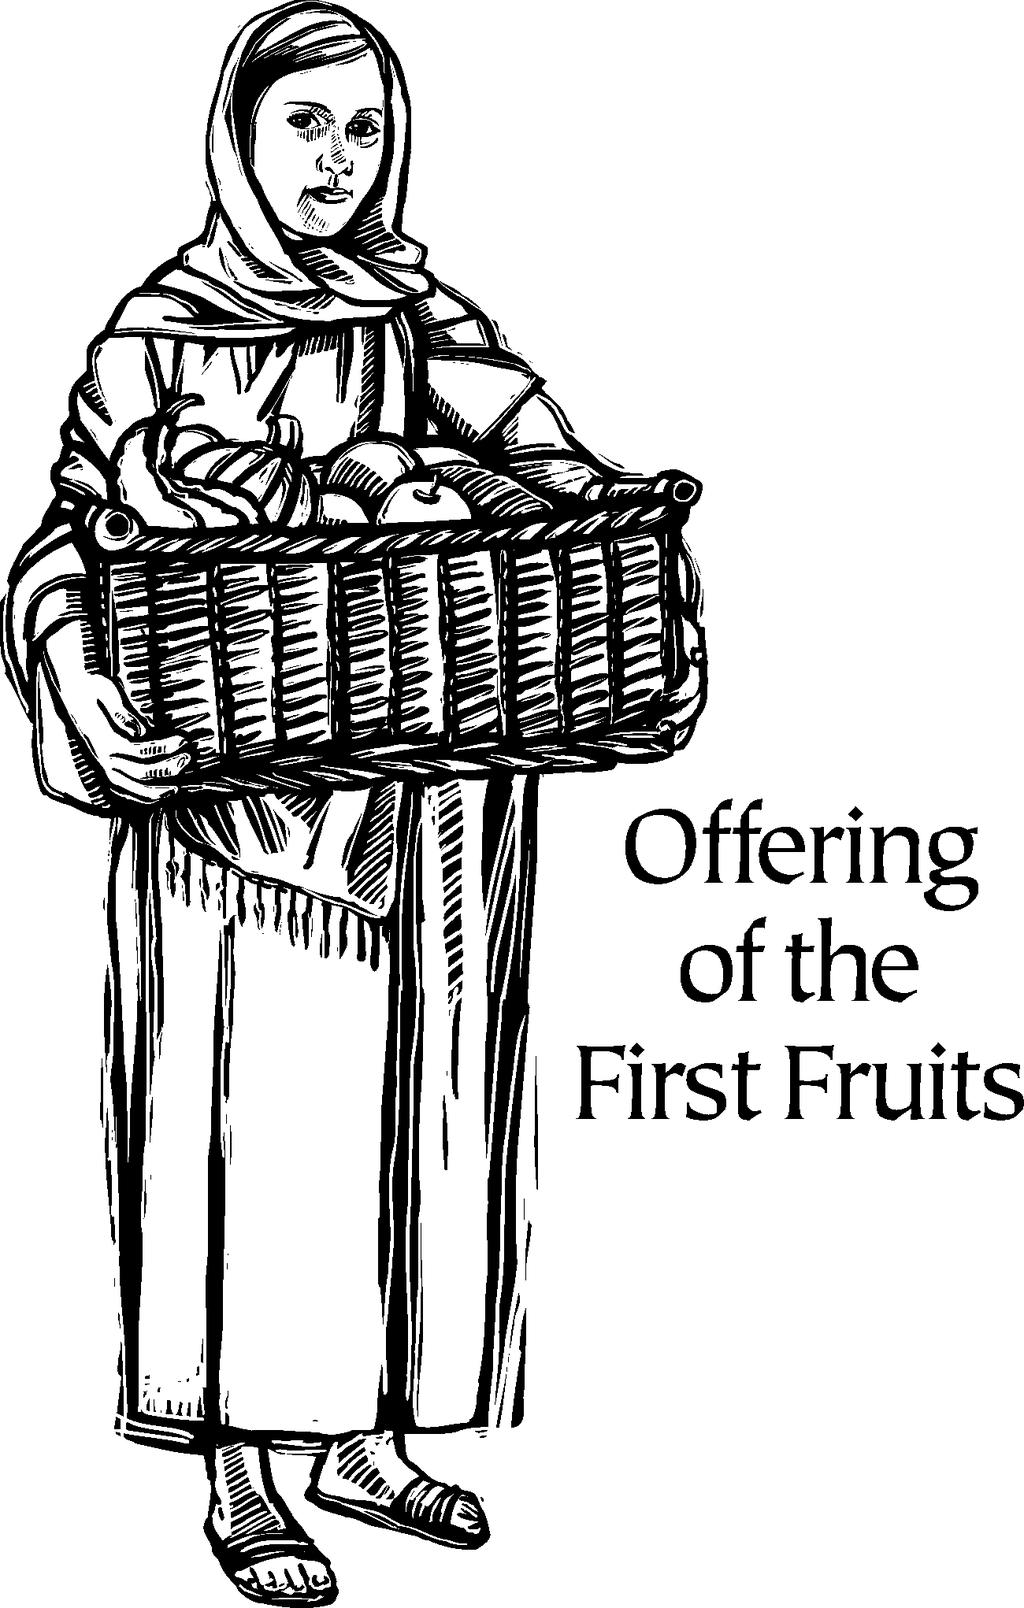 Lent One: Deuteronomy 26:1-11 (NRSV) Offering of the First Fruits 1When you have come into the land that the Lord your God is giving you as an inheritance to possess, and you possess it, and settle